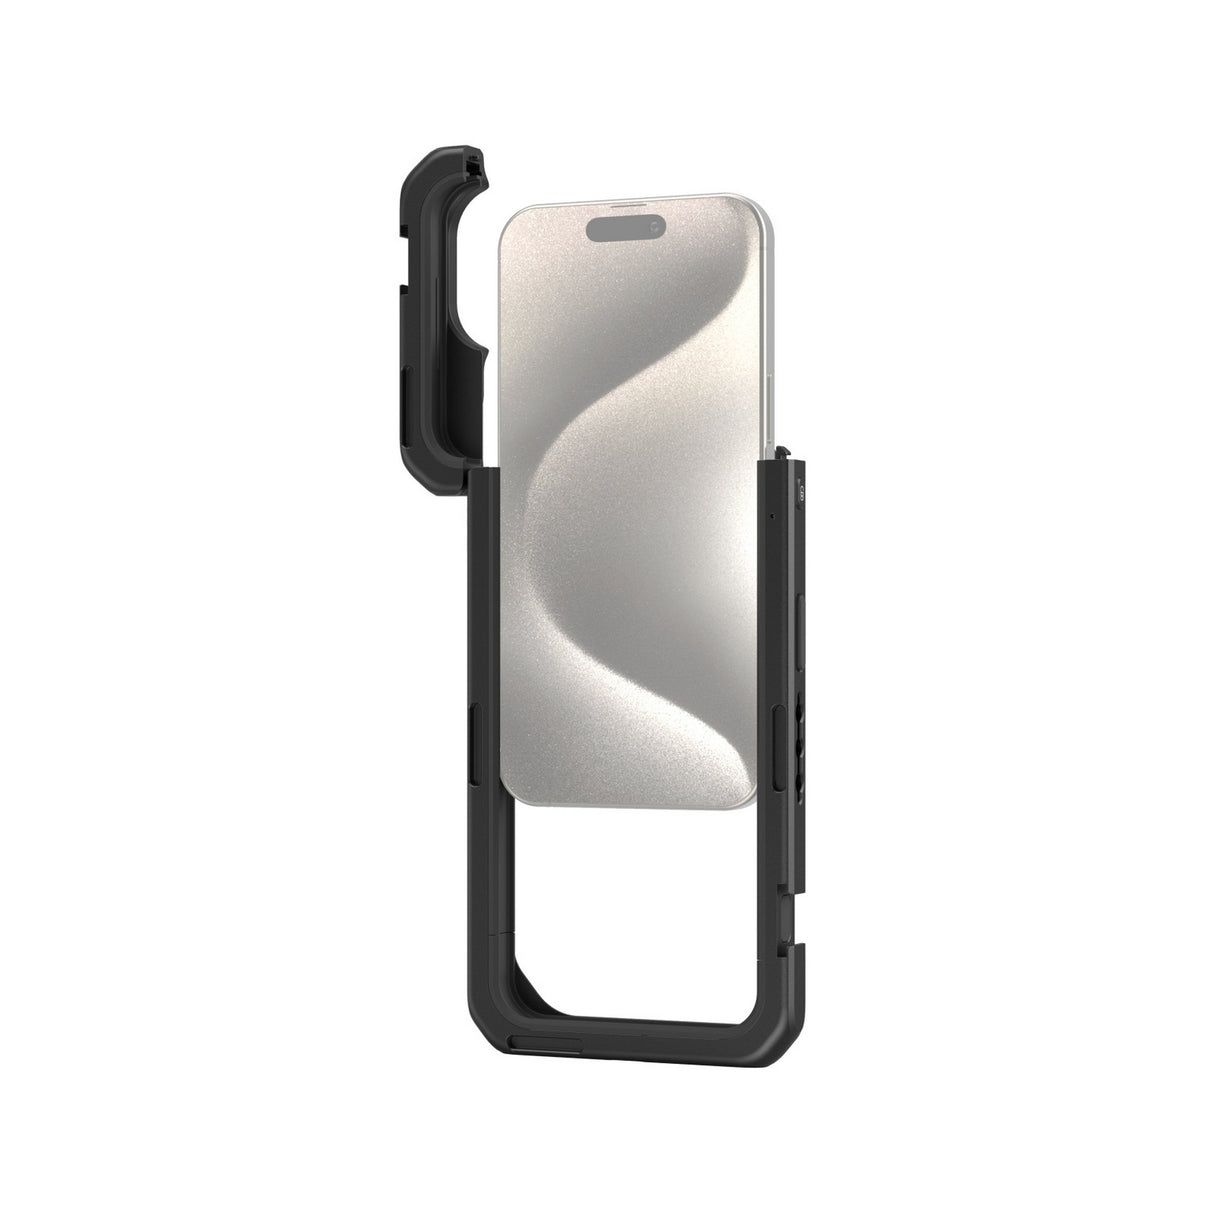 SmallRig Mobile Video Cage for iPhone 15 Pro Max